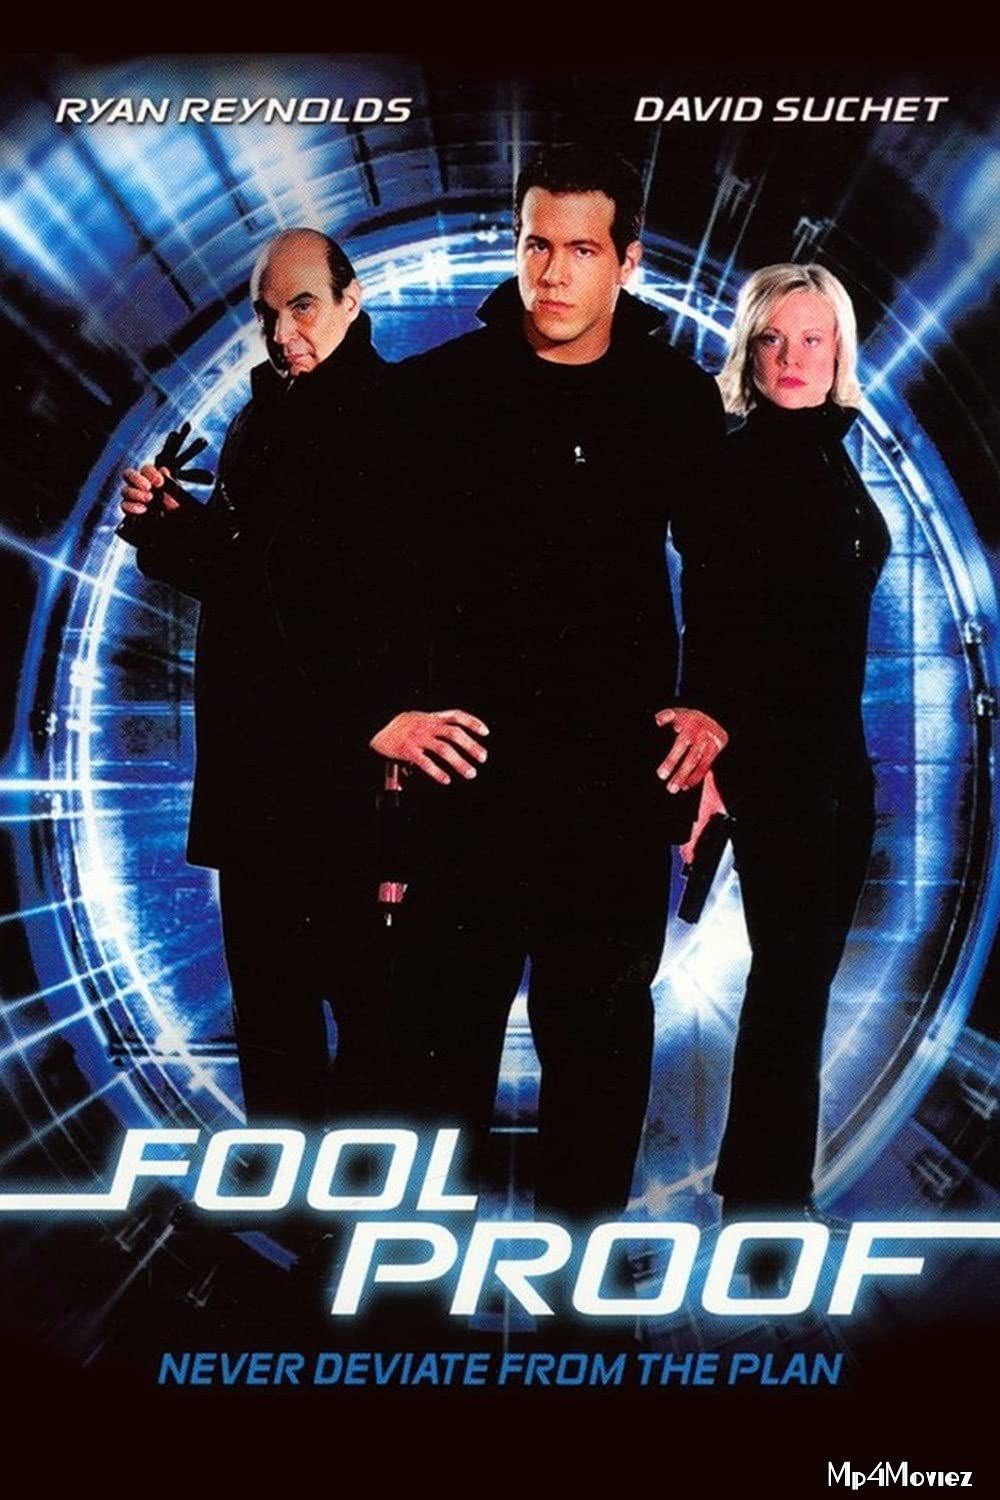 Foolproof 2003 Hindi Dubbed Movie BluRay download full movie